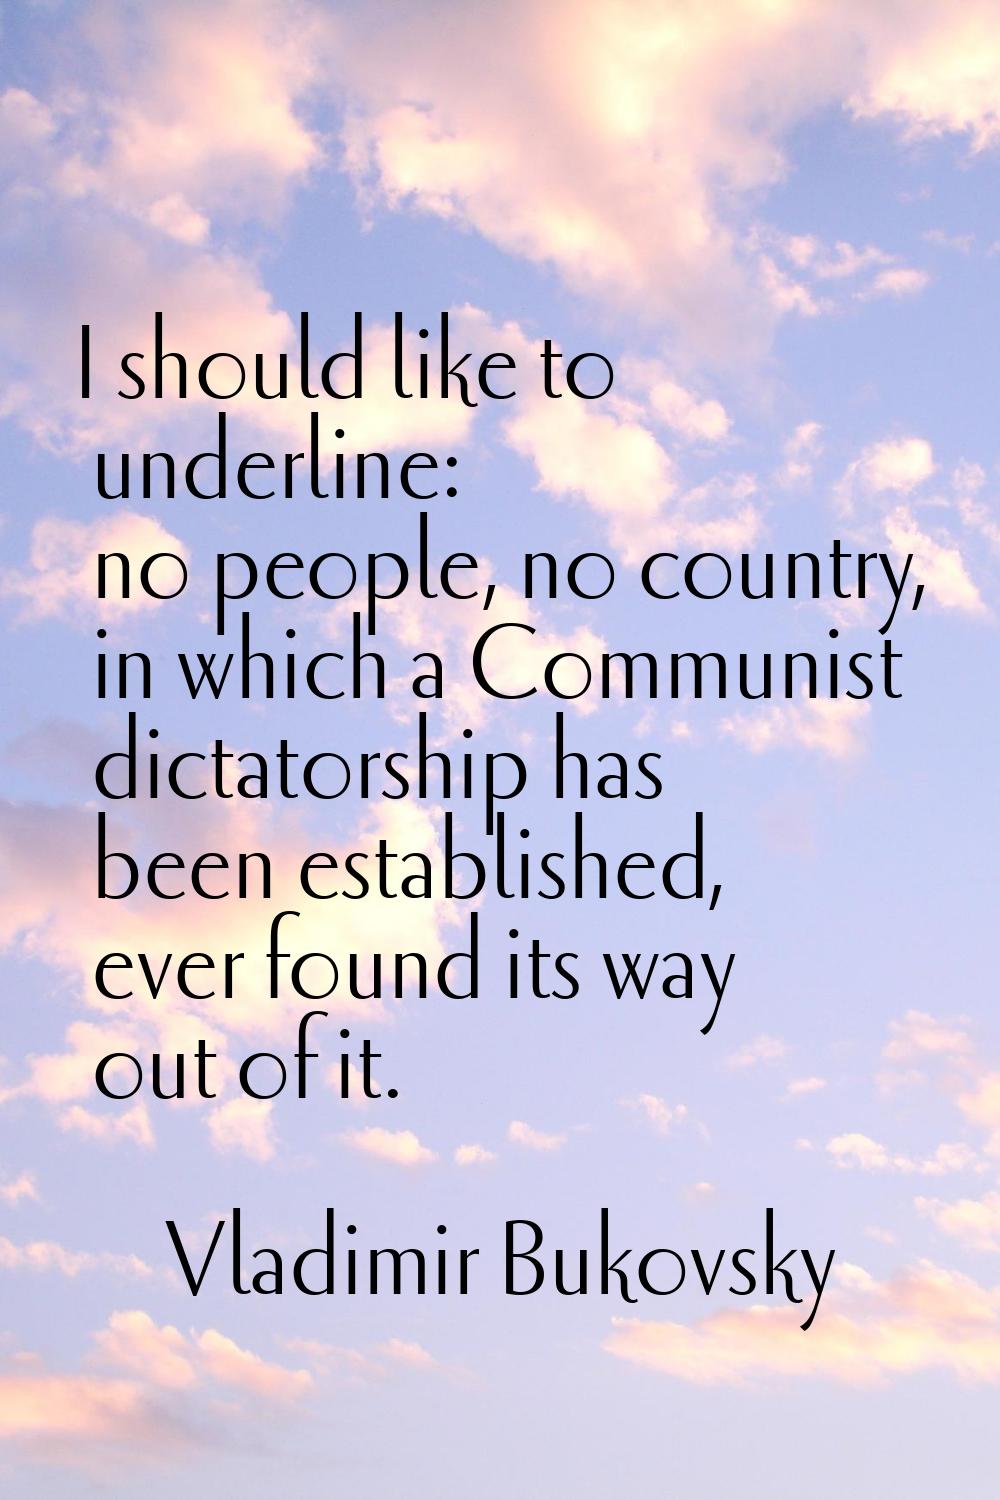 I should like to underline: no people, no country, in which a Communist dictatorship has been estab